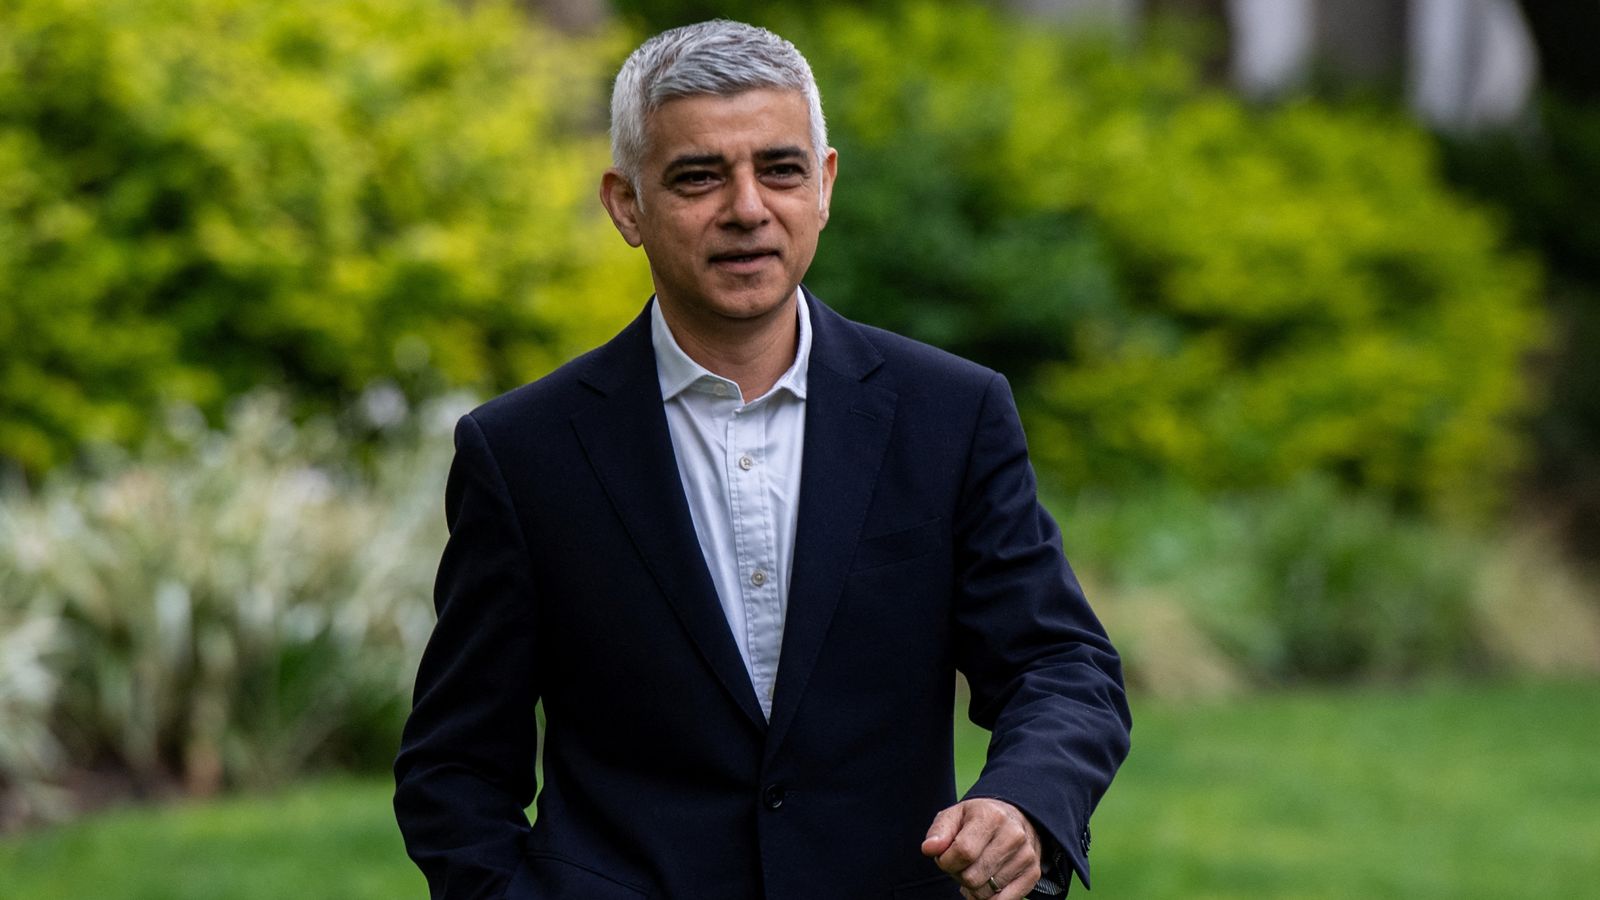 Sadiq Khan Wins Record Third Term as Mayor of London in UK Local Elections